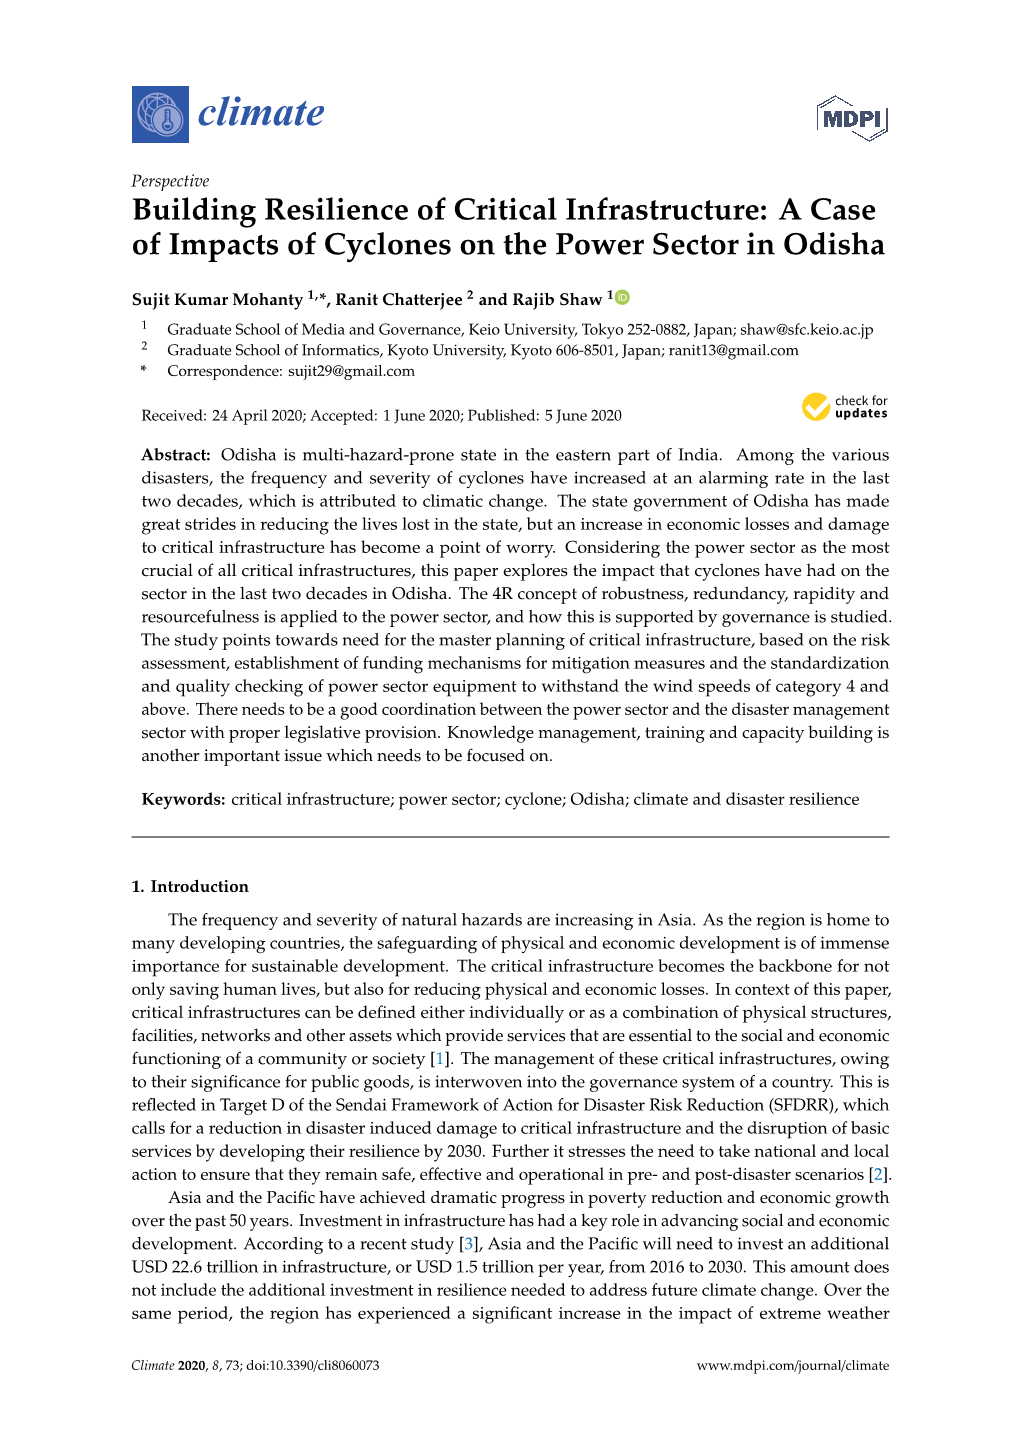 Building Resilience of Critical Infrastructure: a Case of Impacts of Cyclones on the Power Sector in Odisha